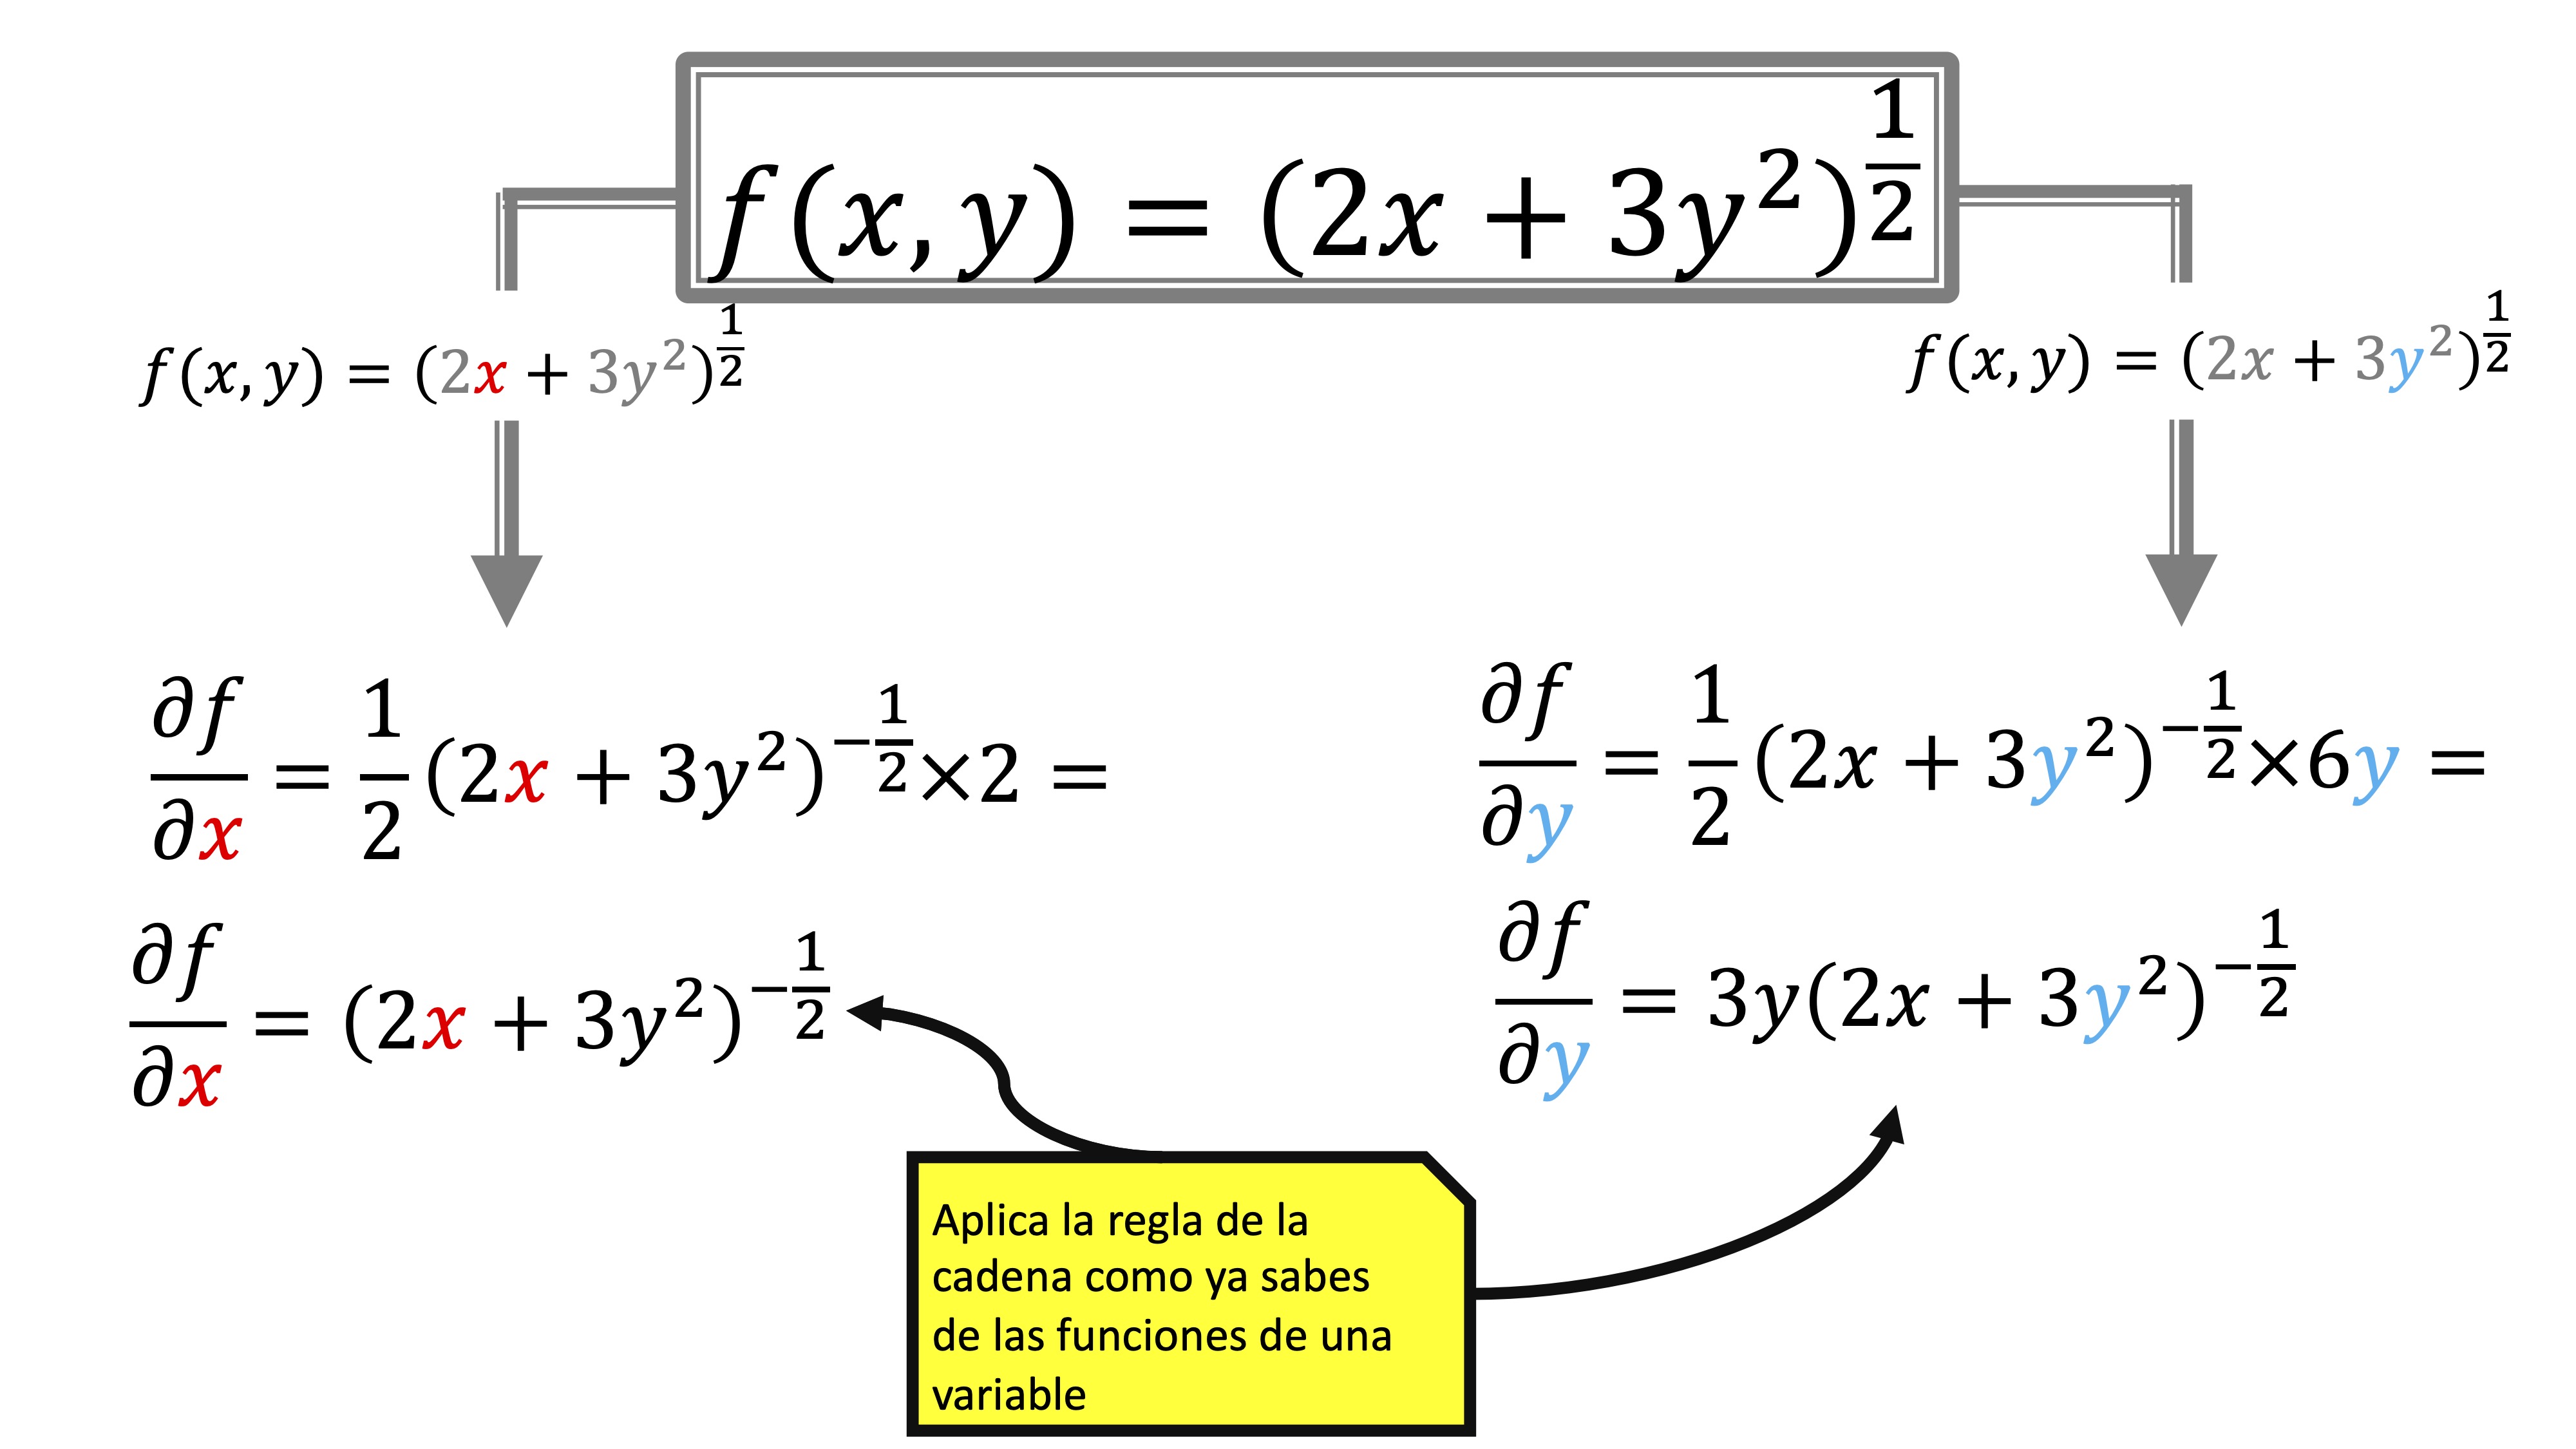 FIG3 The partial derivatives of the function f(x,y)=(2x+3y^2)^(1/2)